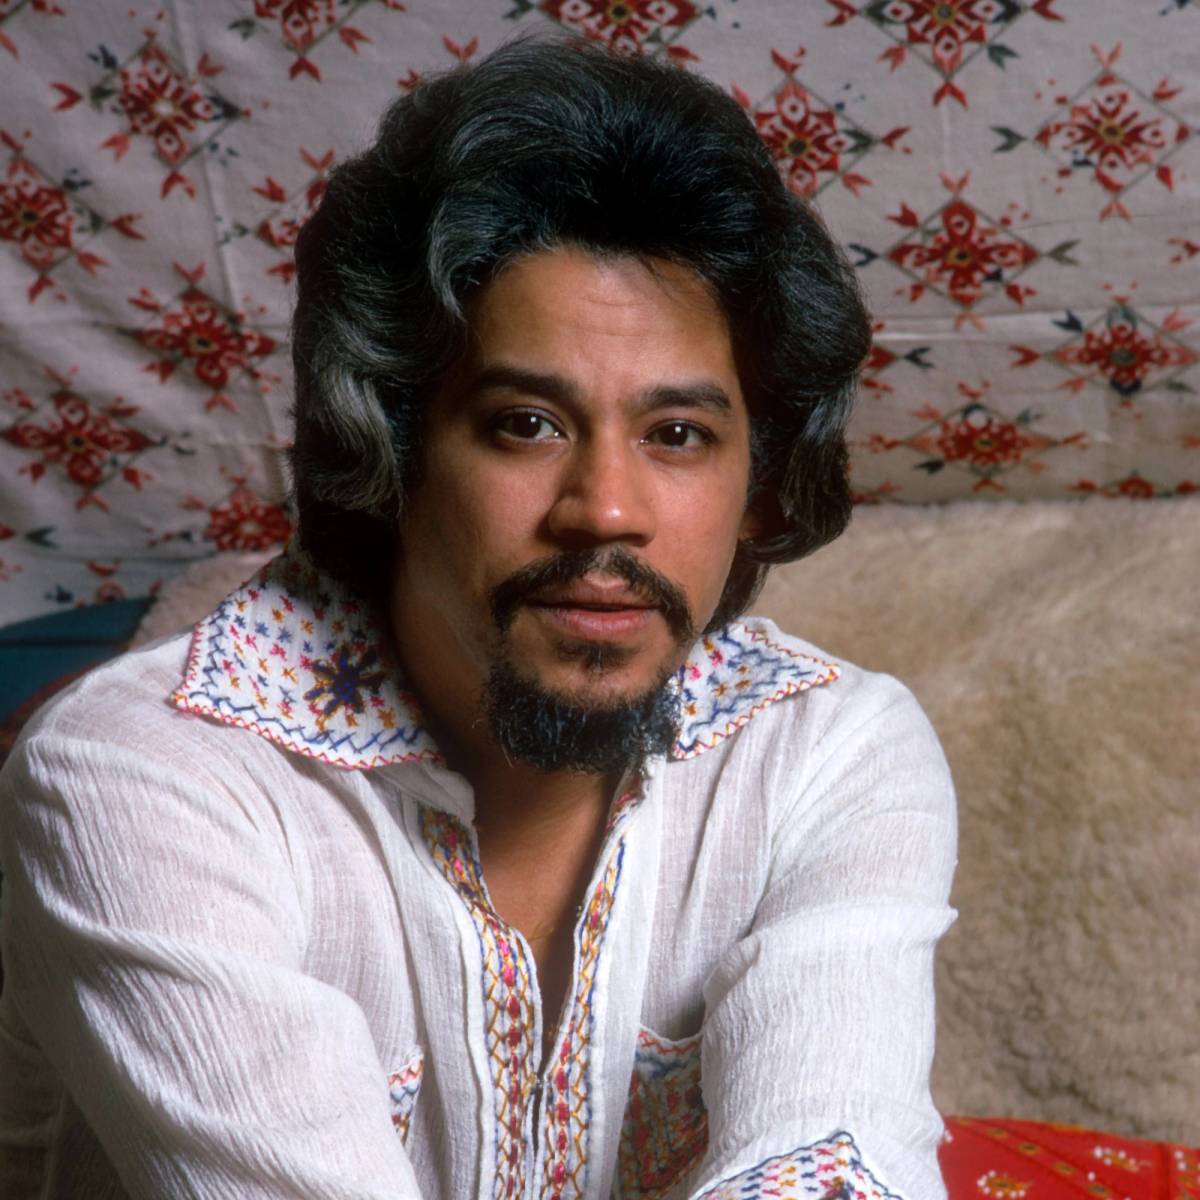 Bandleader and Fania co-founder Johnny Pacheco